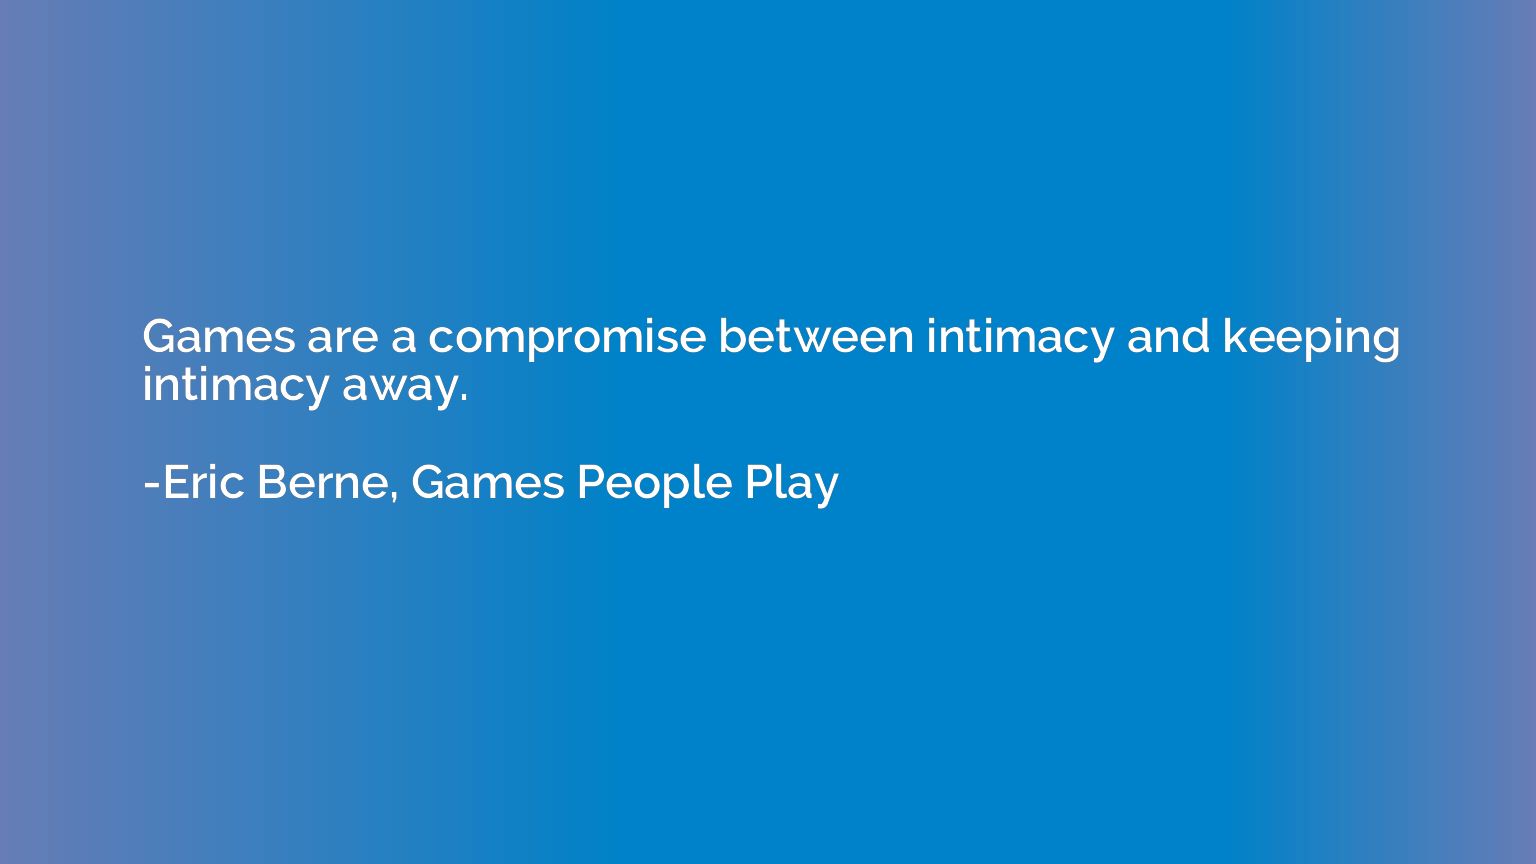 Games are a compromise between intimacy and keeping intimacy